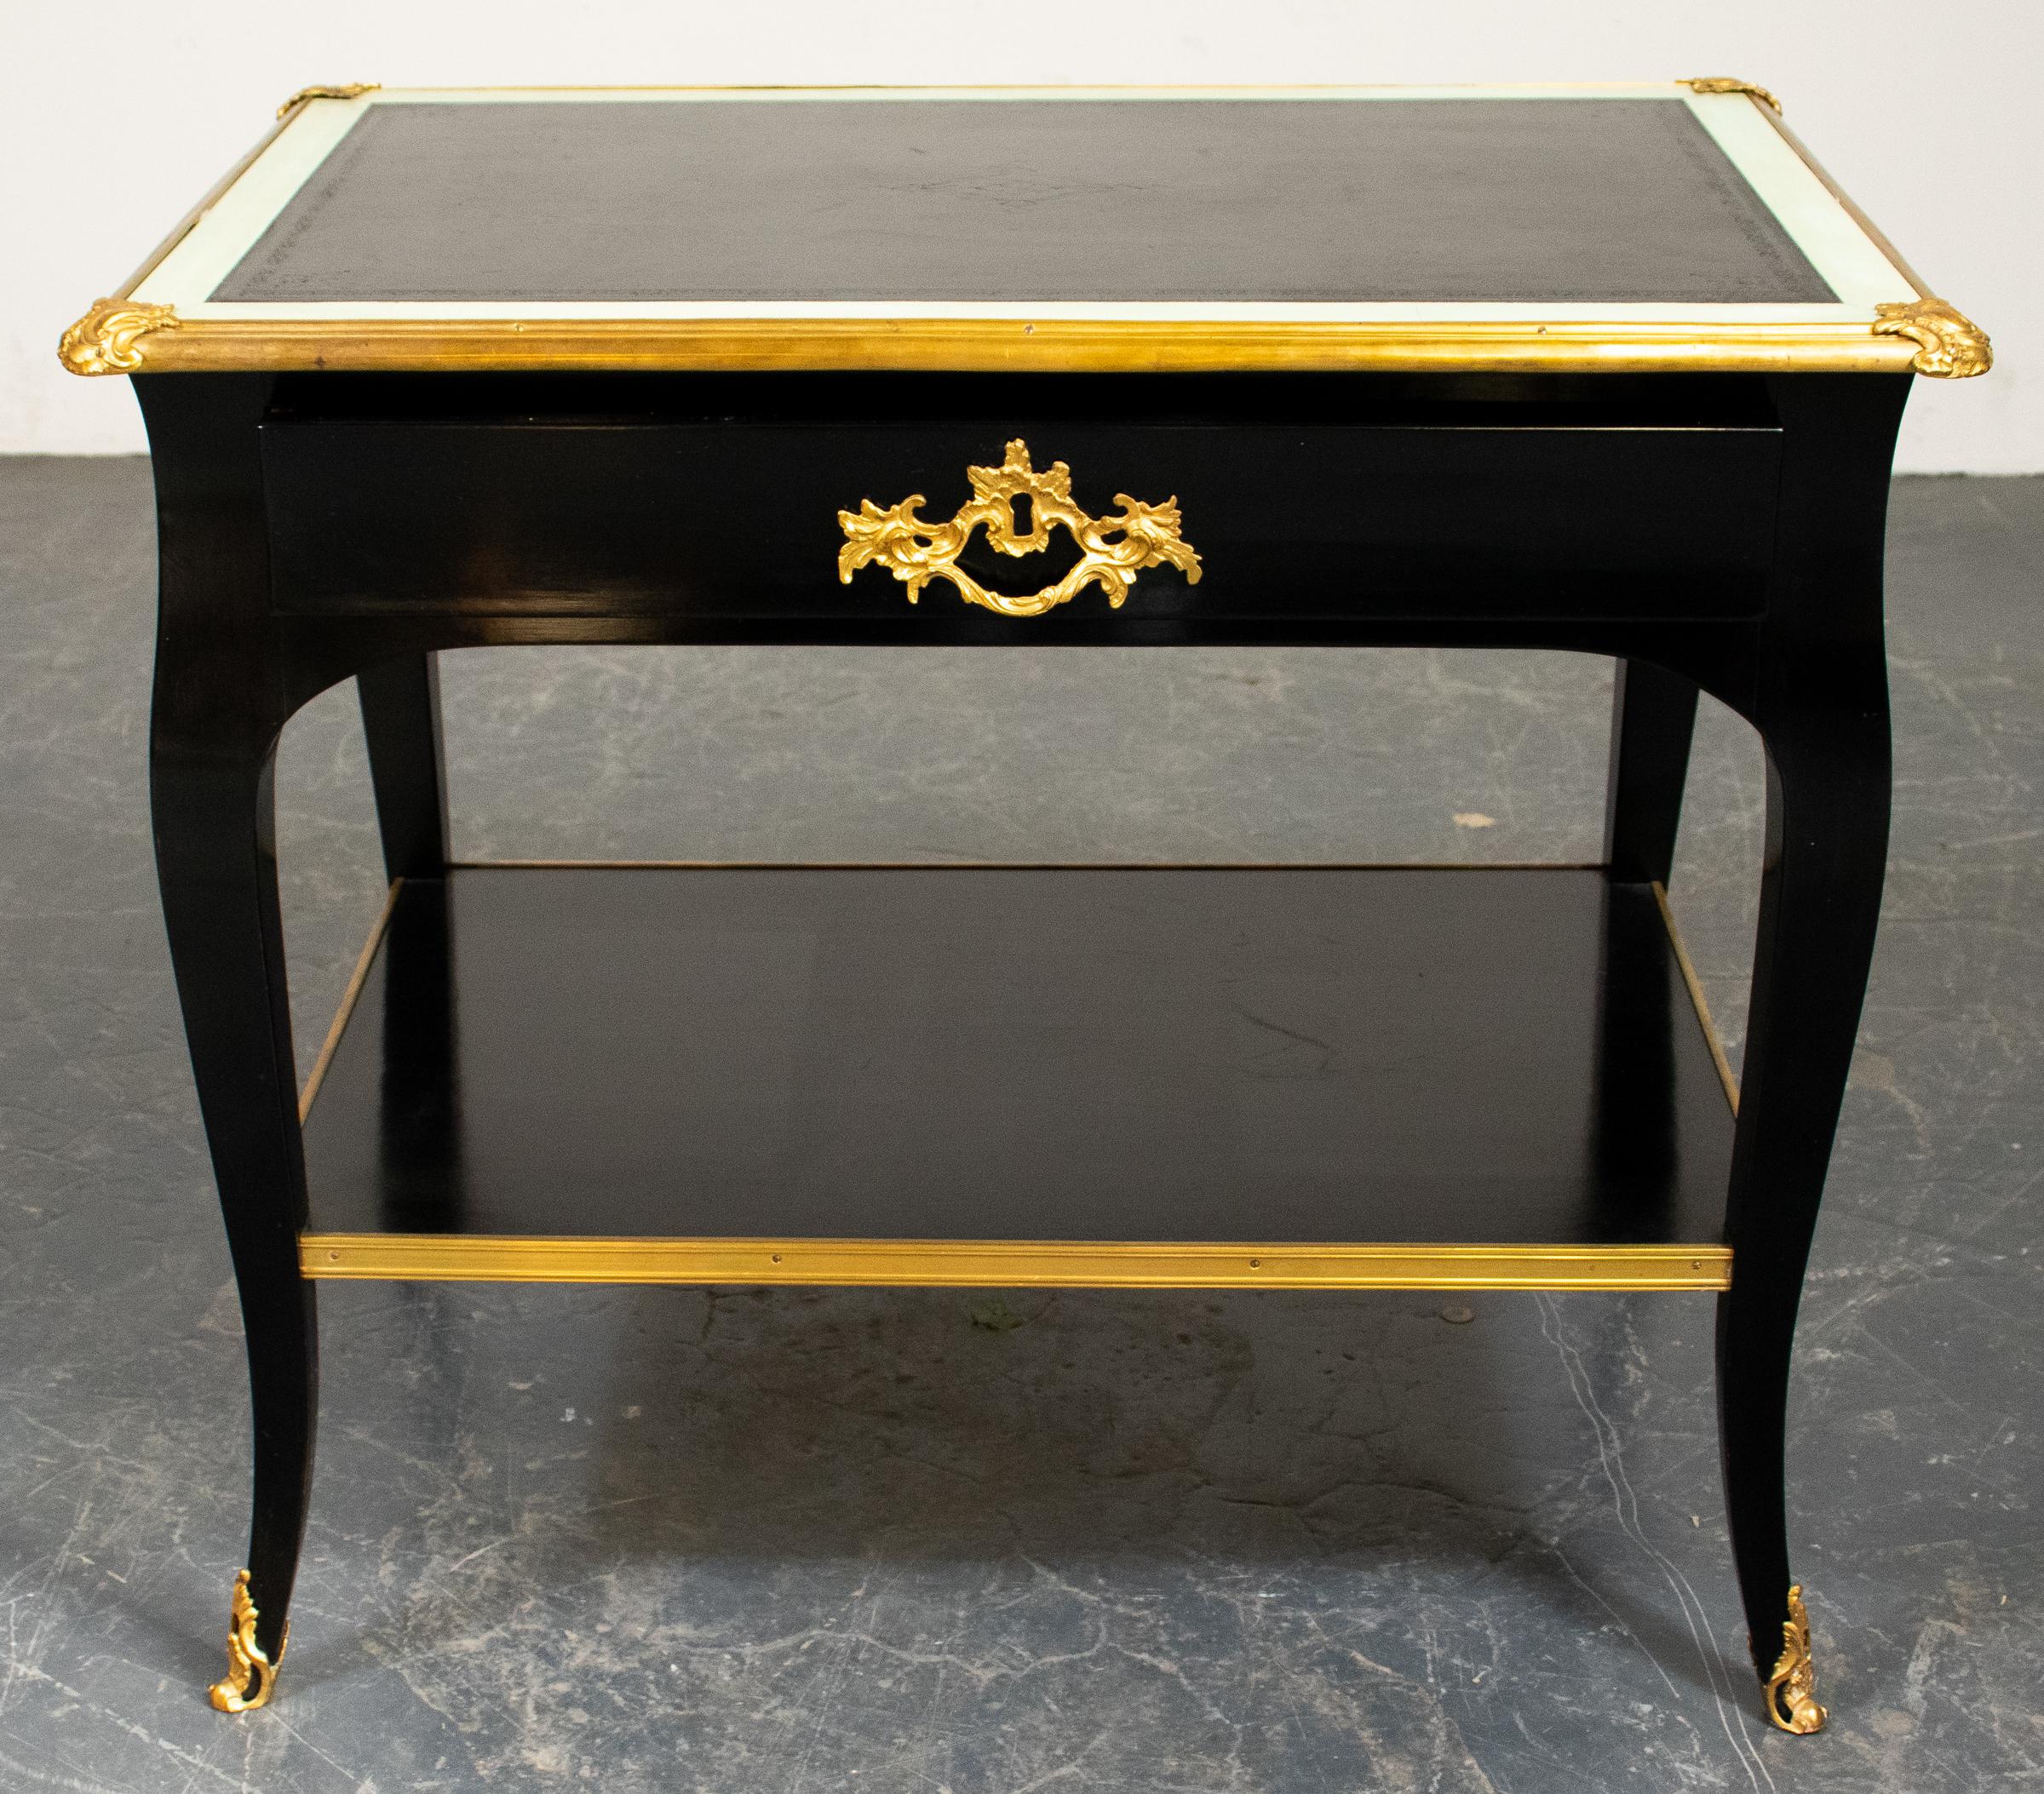 Louis XV style ebonized two-tier tea table, 20th century, the top and shelf with gilt metal banding, with single drawer, the cabriole legs terminating on scrolling gilt metal sabots. Measures: 28” H x 33” W x 23” D.